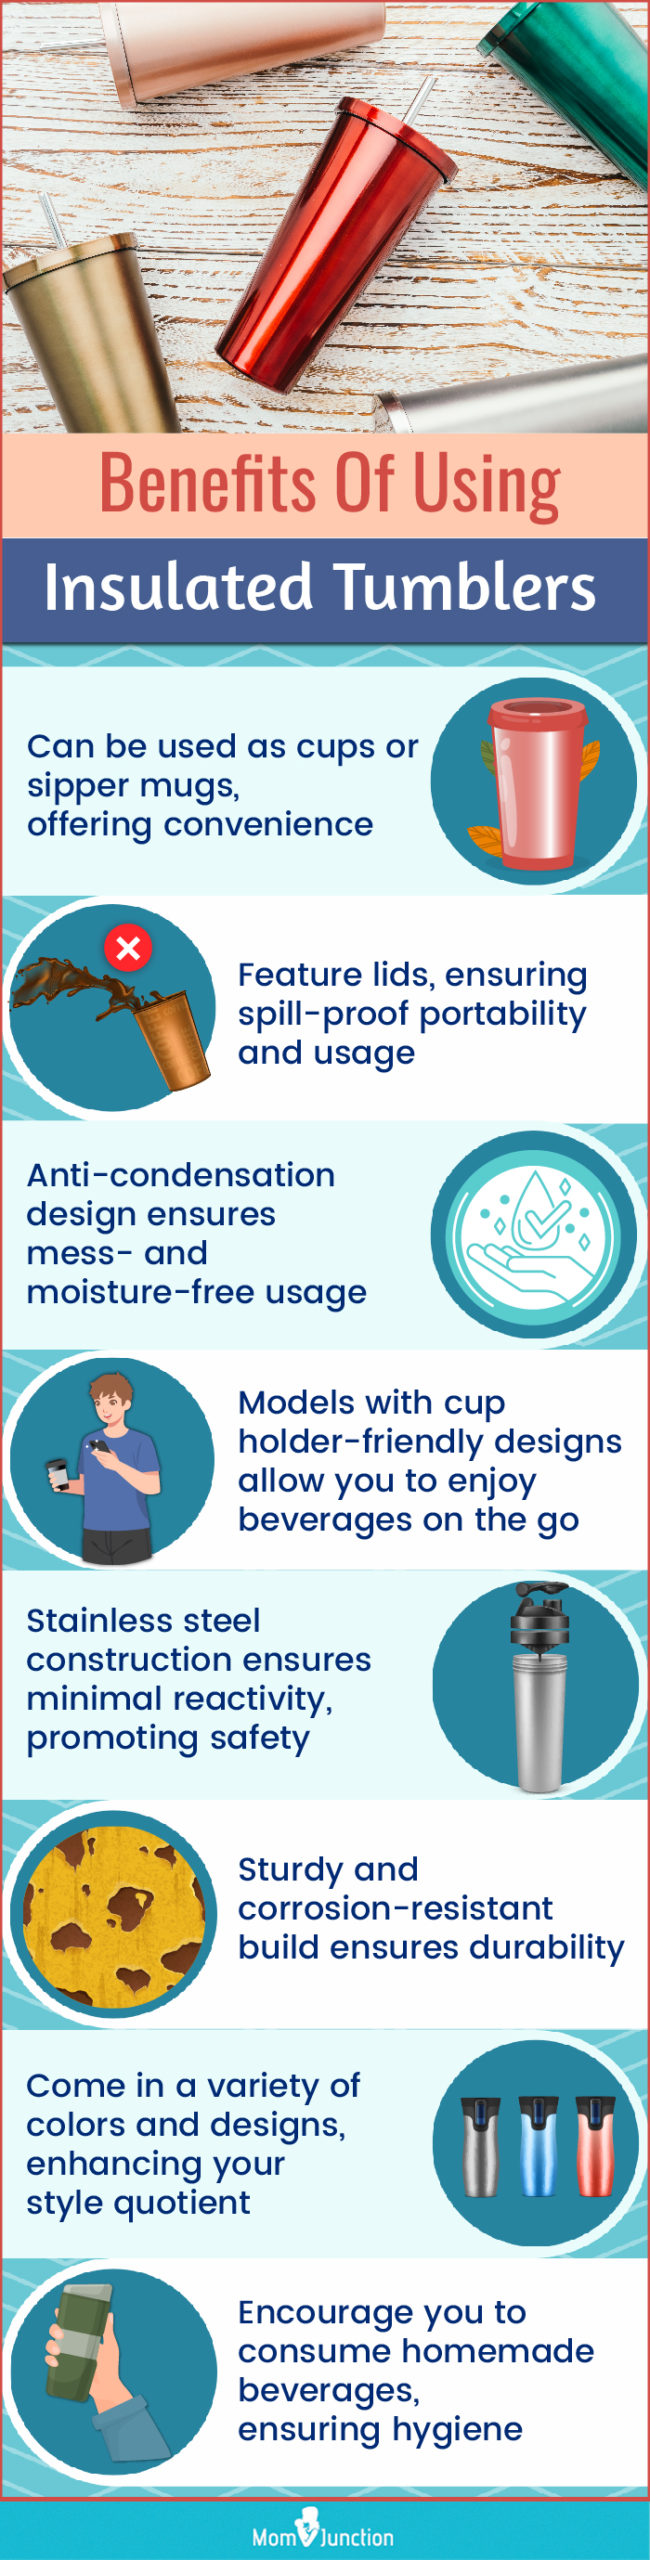 Benefits Of Using Insulated Tumblers (infographic)